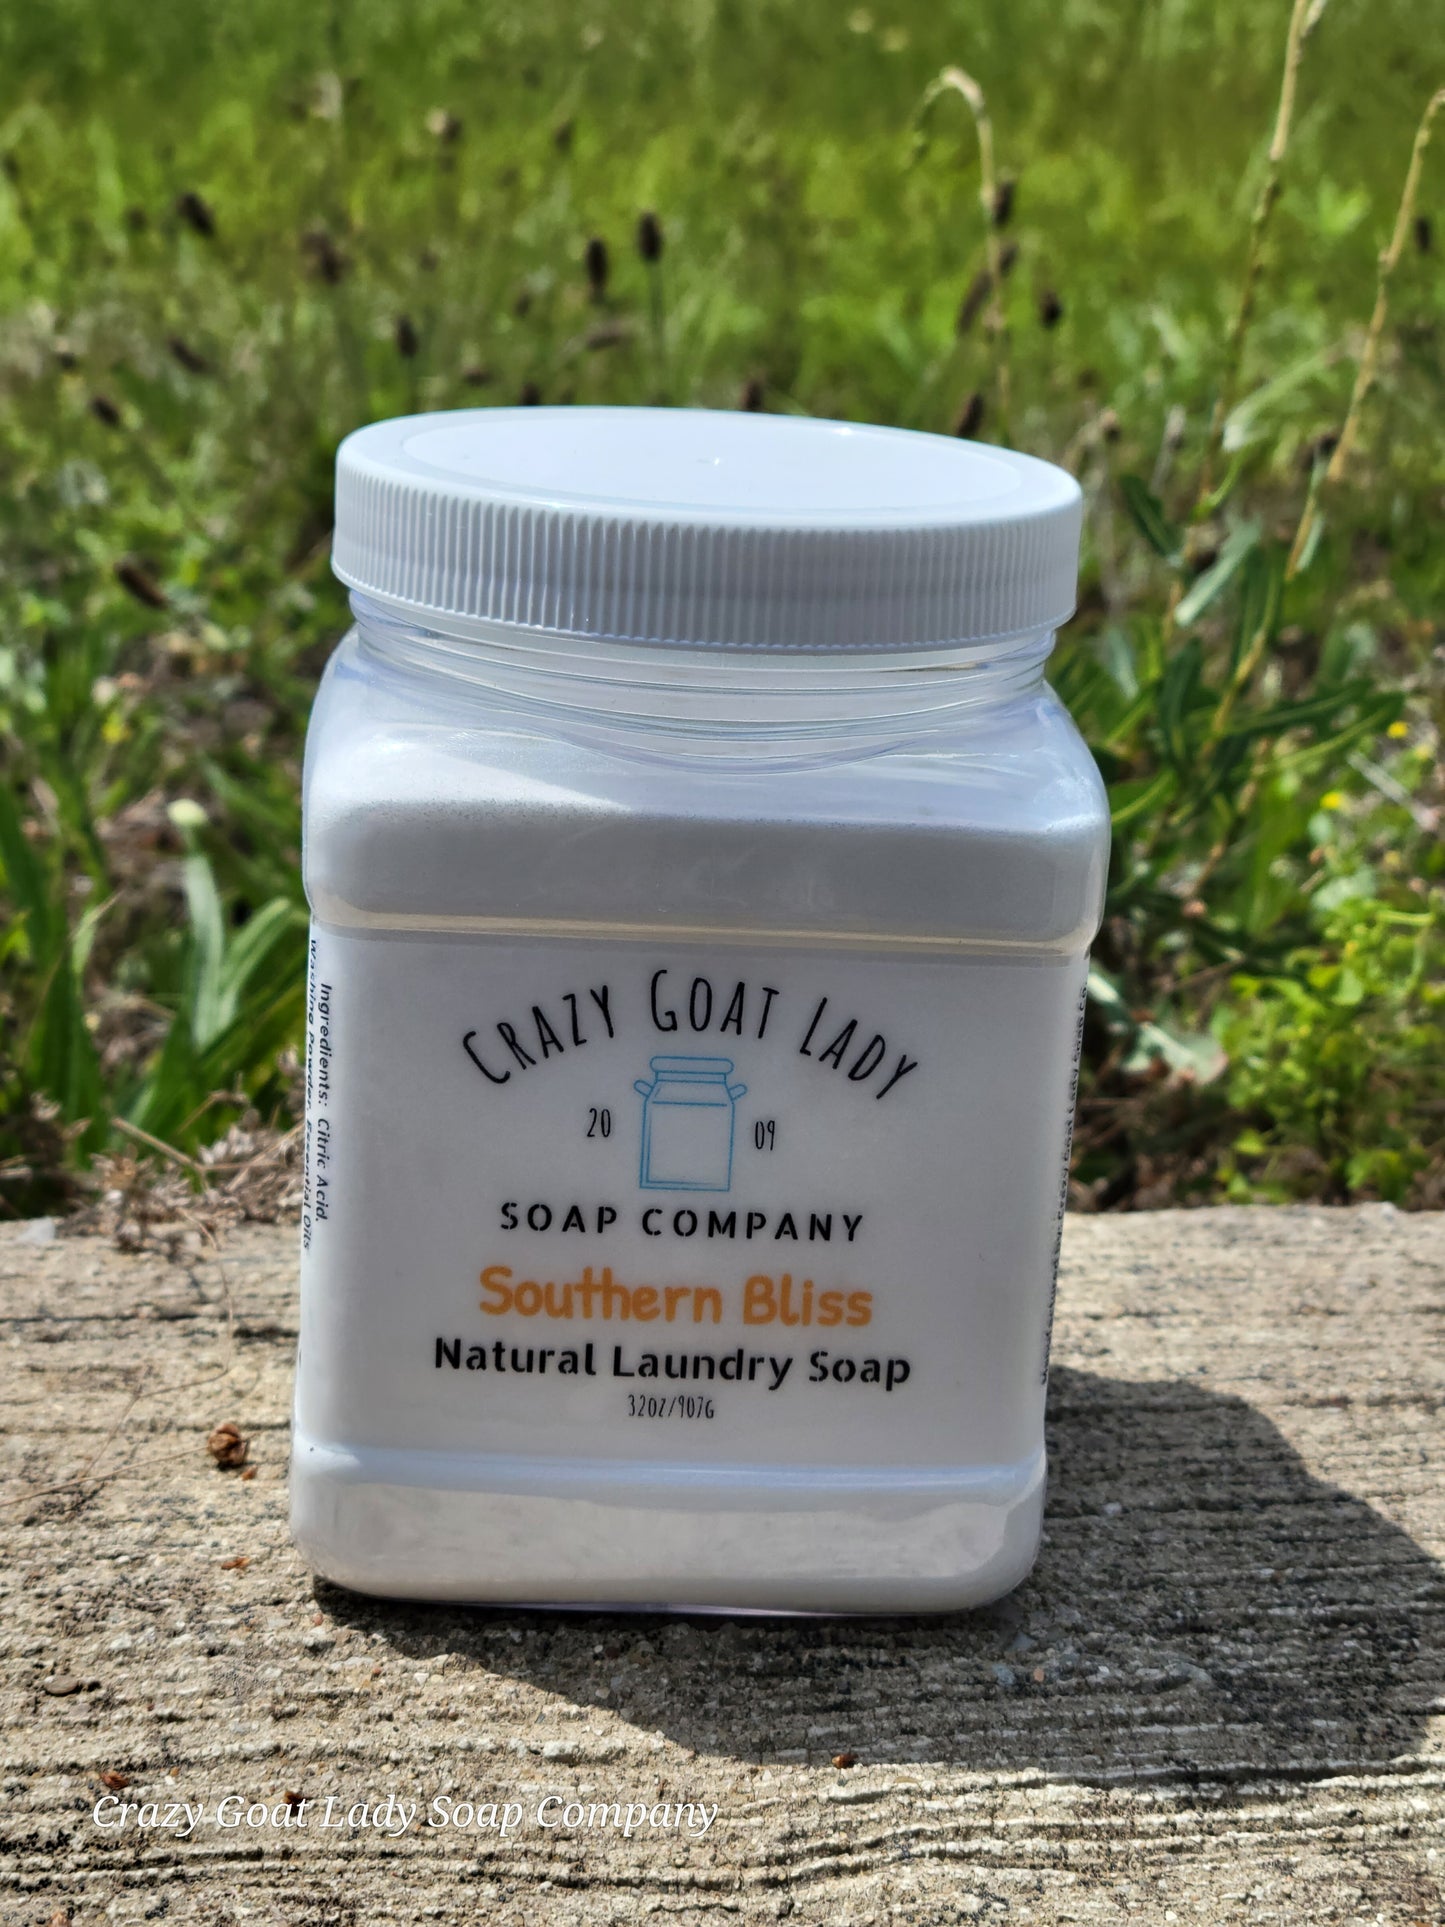 Southern Bliss Laundry Soap